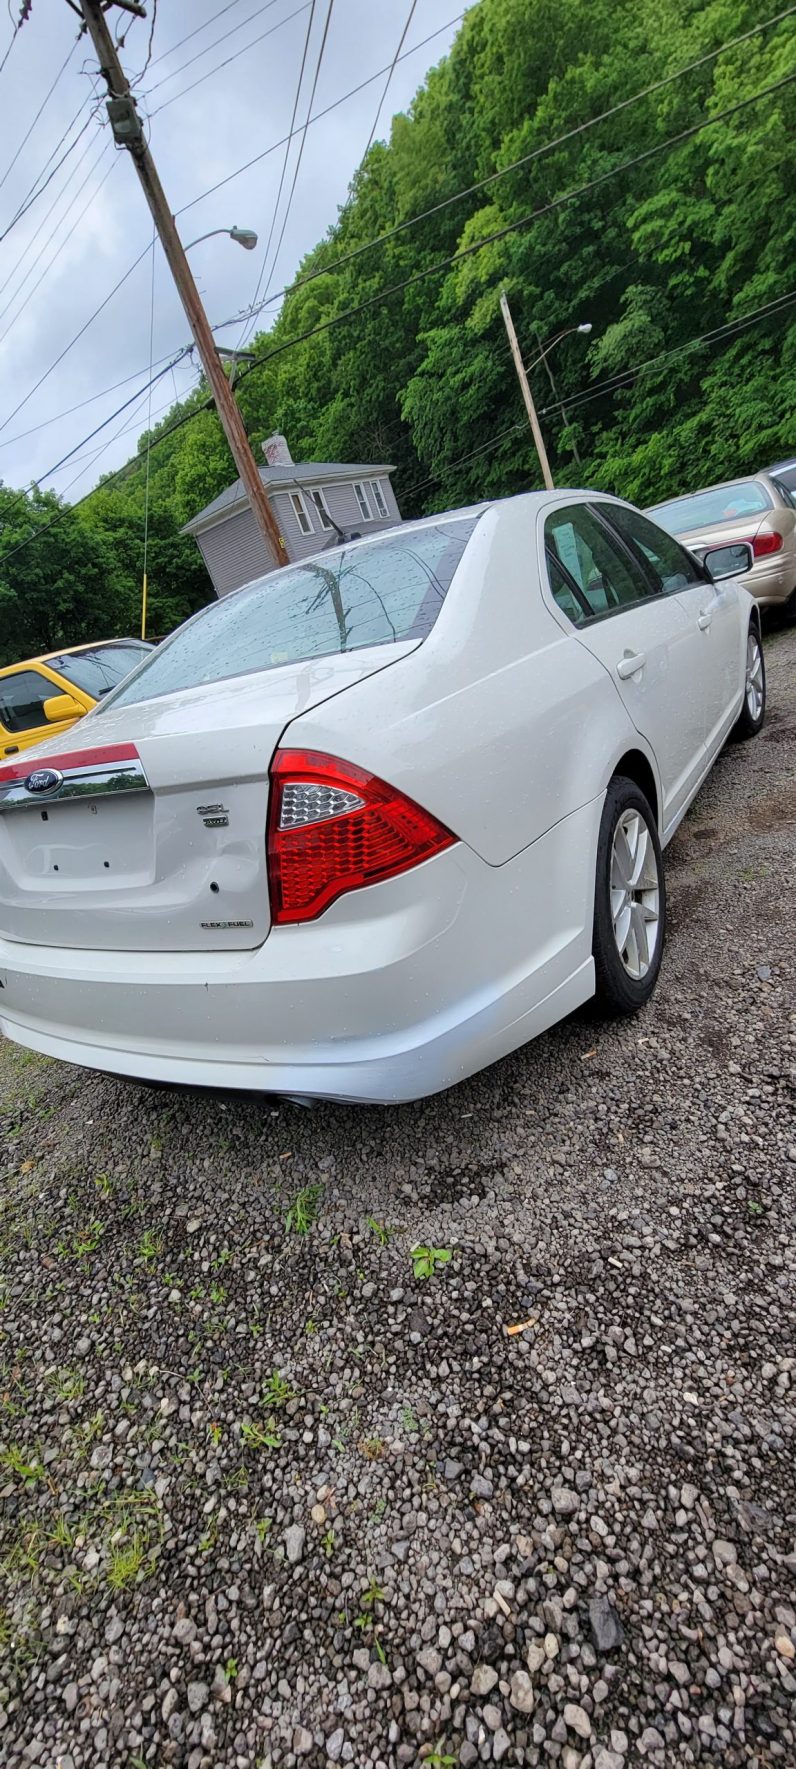 
								2012 Ford Fusion full									